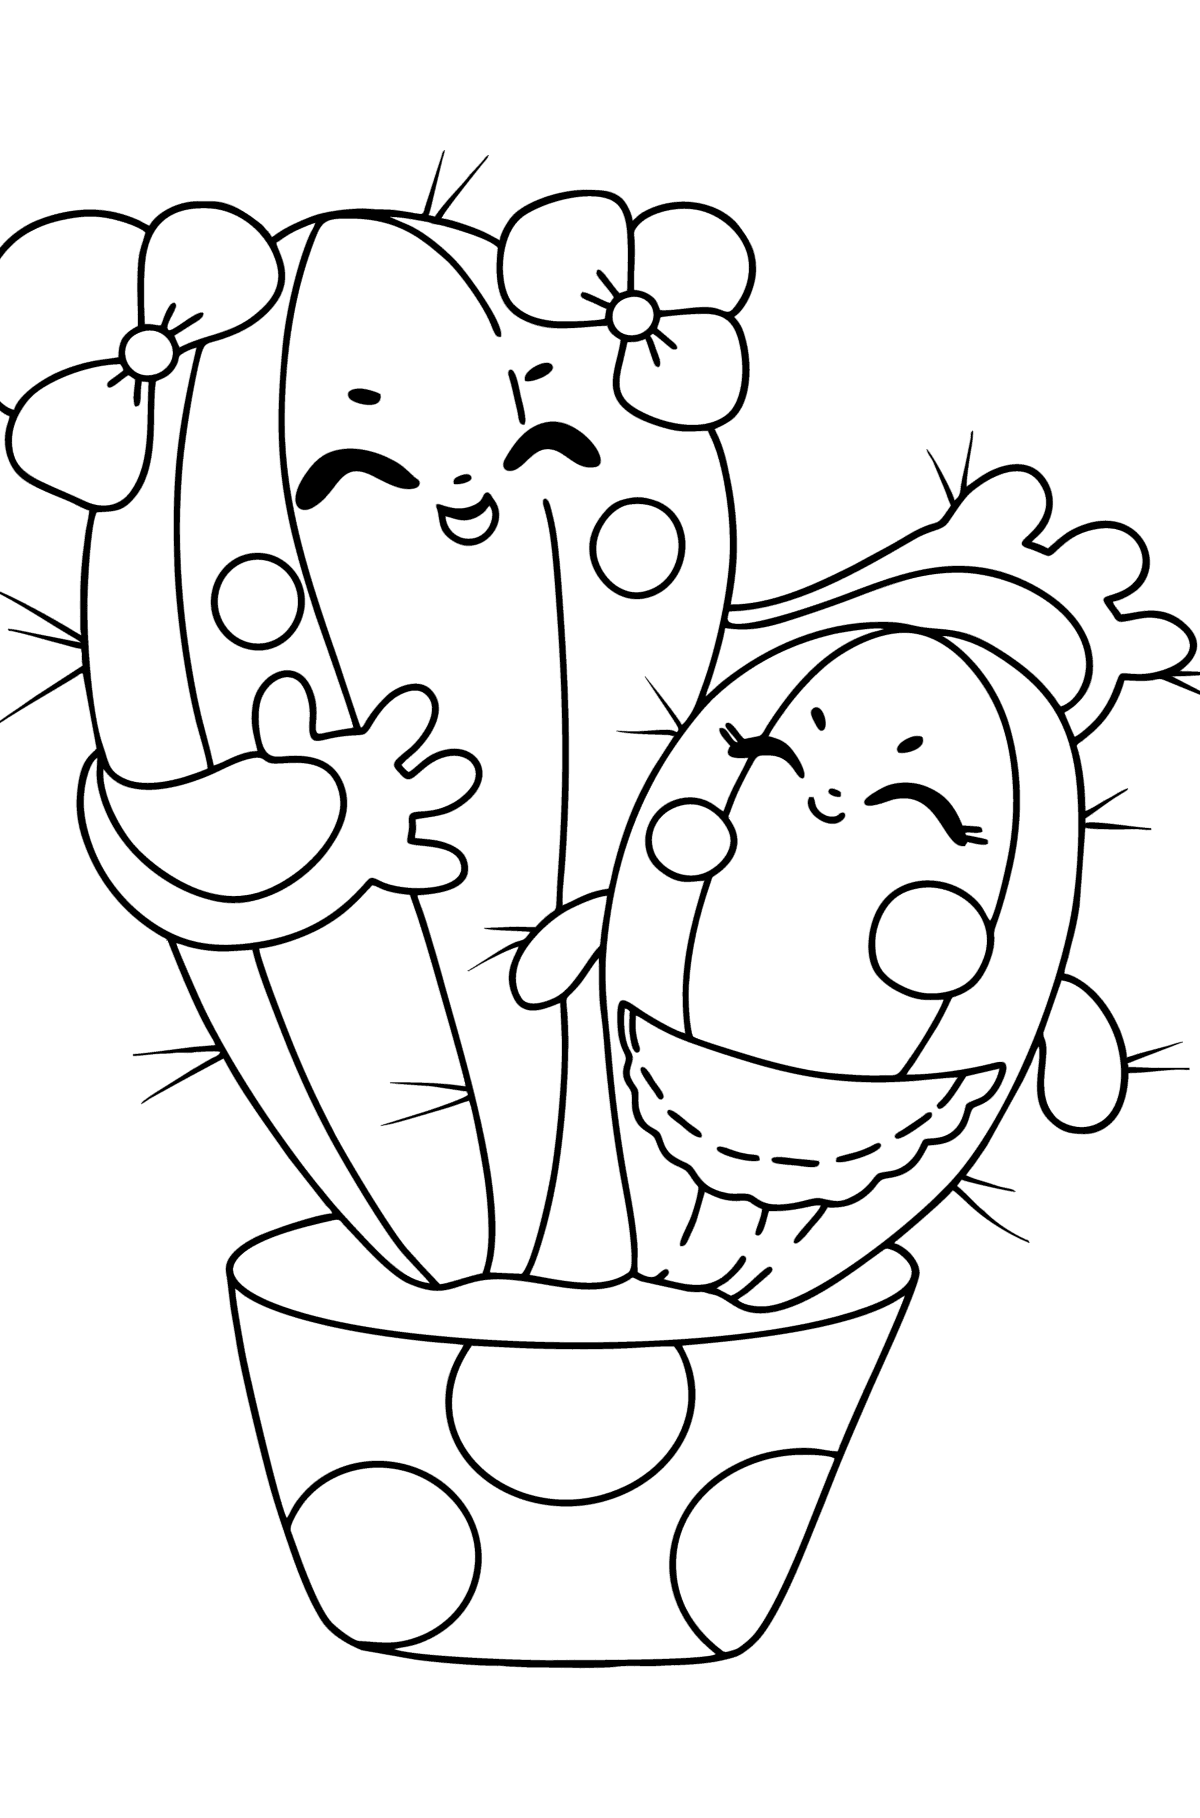 Cartoon Cactus coloring page - Coloring Pages for Kids